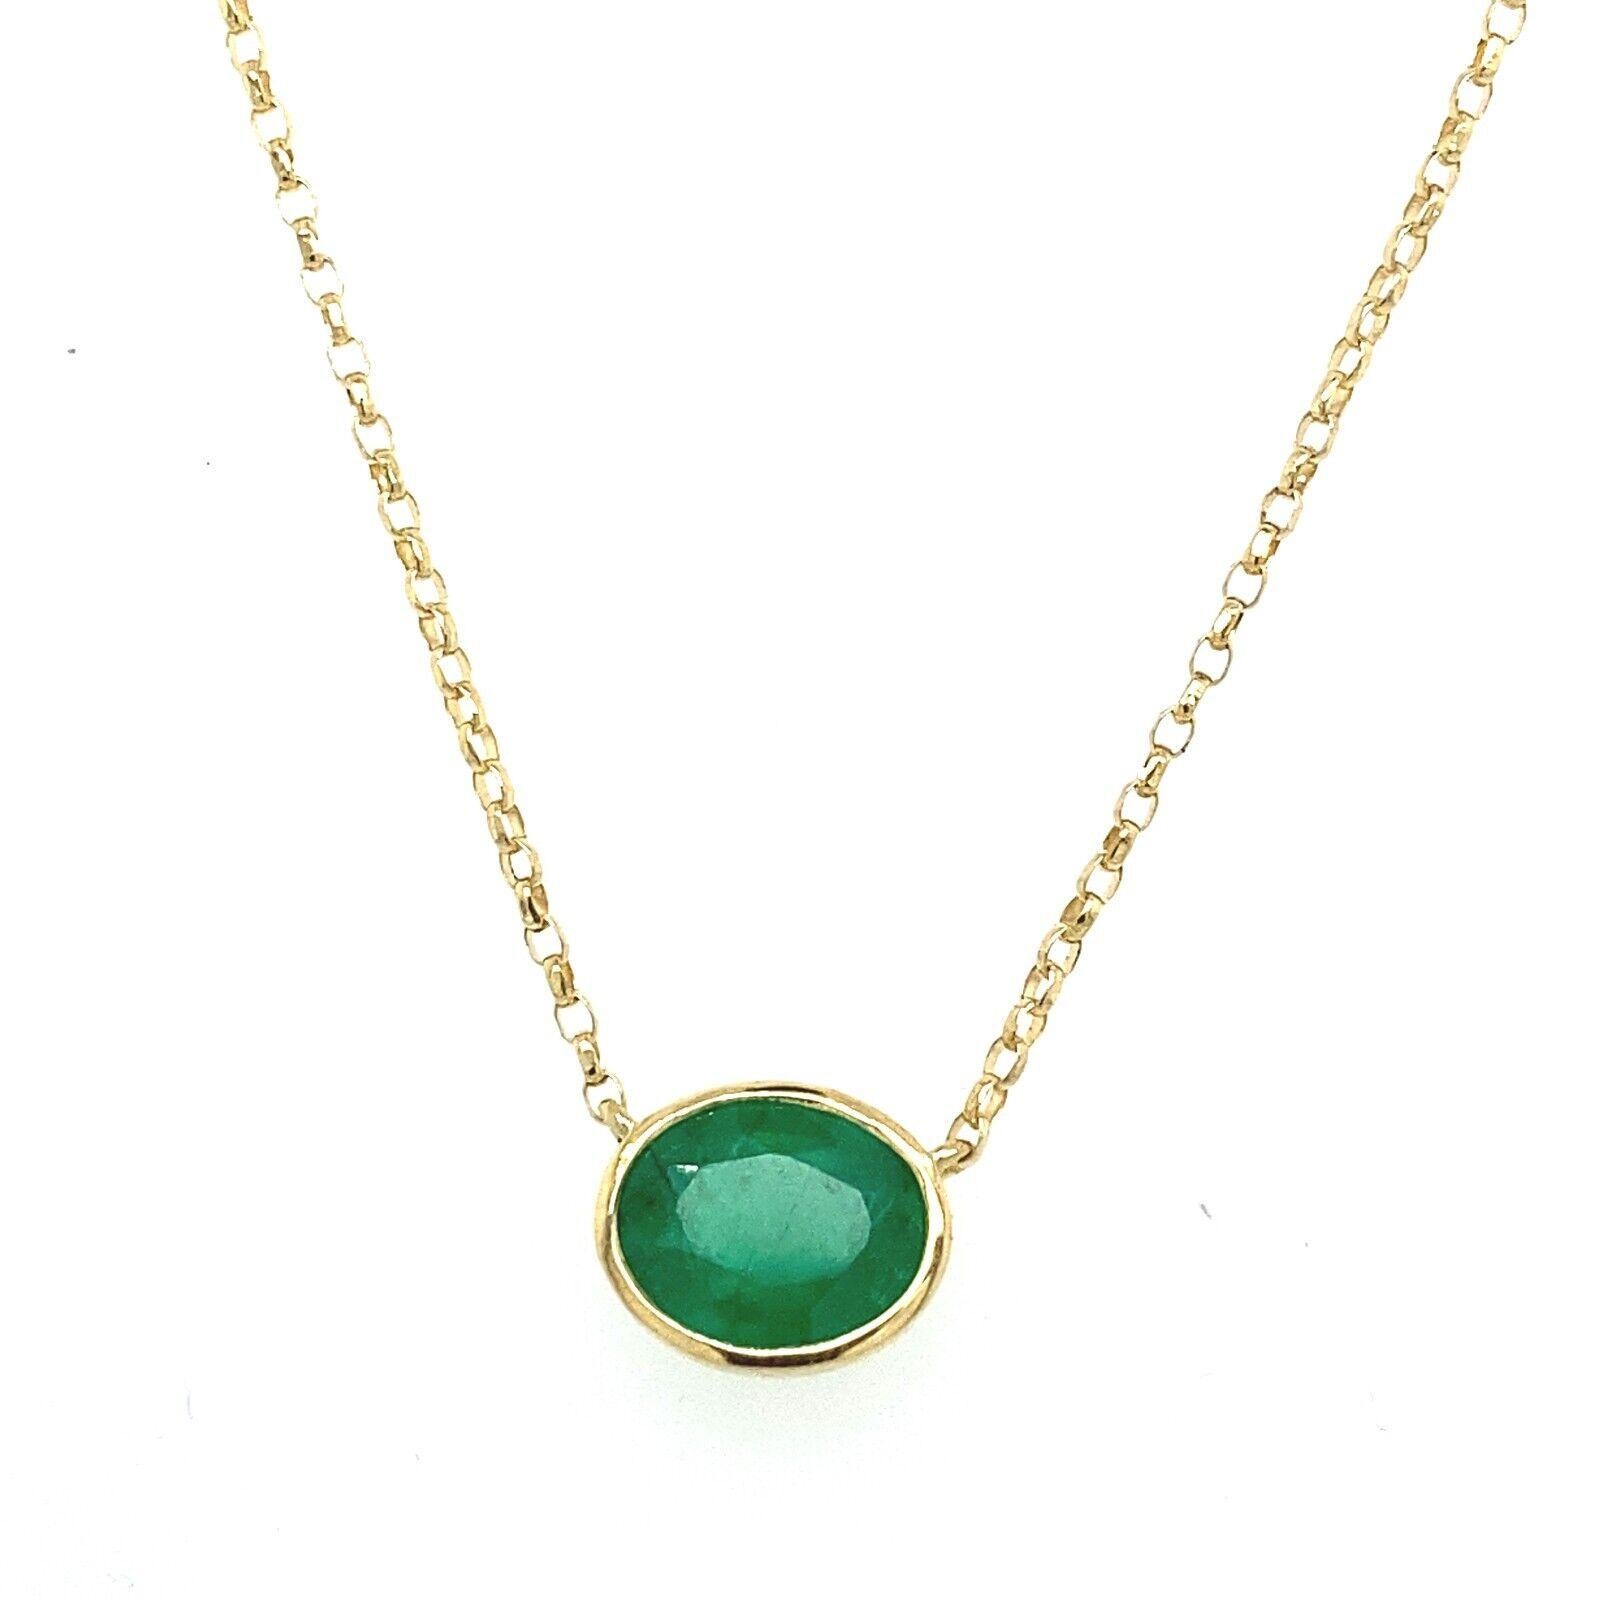 A dazzling Emerald pendant is set in a rubover setting made in 18ct Yellow Gold. The Emerald is a symbol of love, and is the traditional gift for 4th and 17th wedding anniversaries. This pendant has a total Emerald weight of 0.90ct, suspended on 16